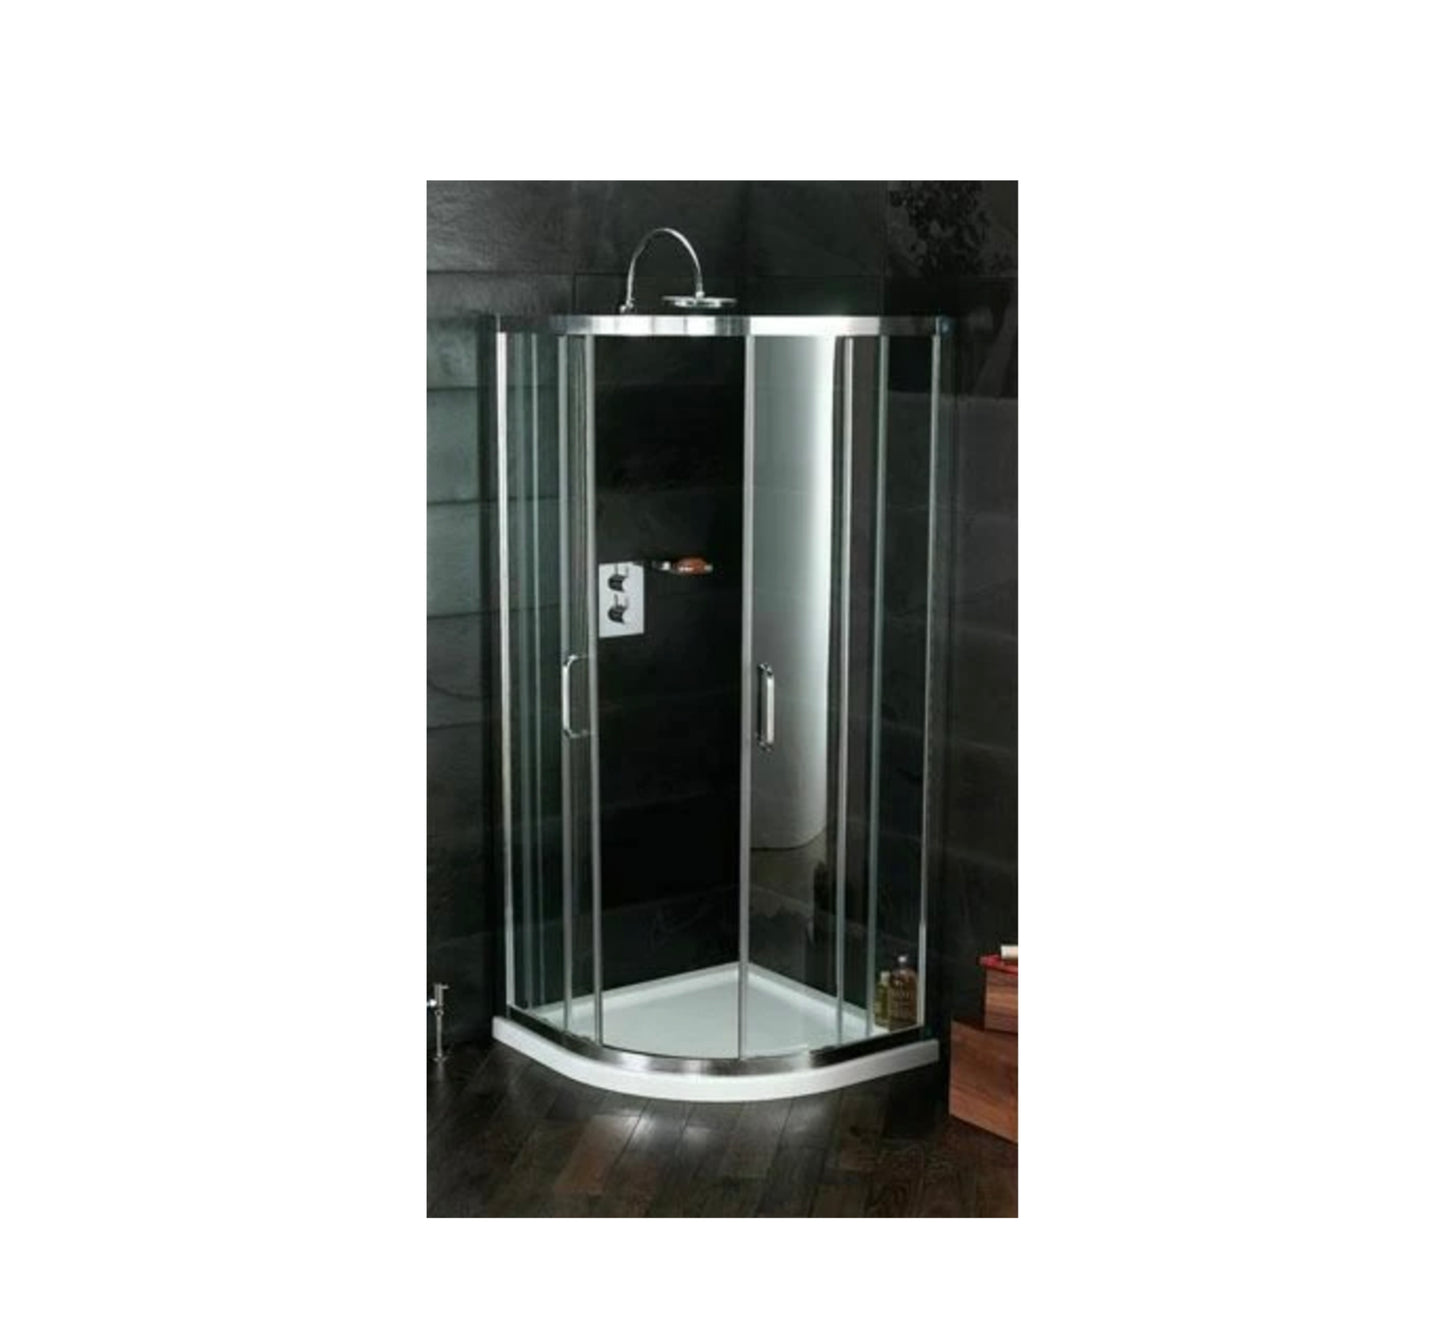 HUPPE X1 QUADRANT CORNER ENTRY SLIDING SHOWER ENCLOSURE 900X900X1900MM (R500), 6MM CLEAR TEMPERED DOOR, 4MM CLEAR TEMPERED PANEL, HIGH GLOSS SILVER - QUADRANT 900